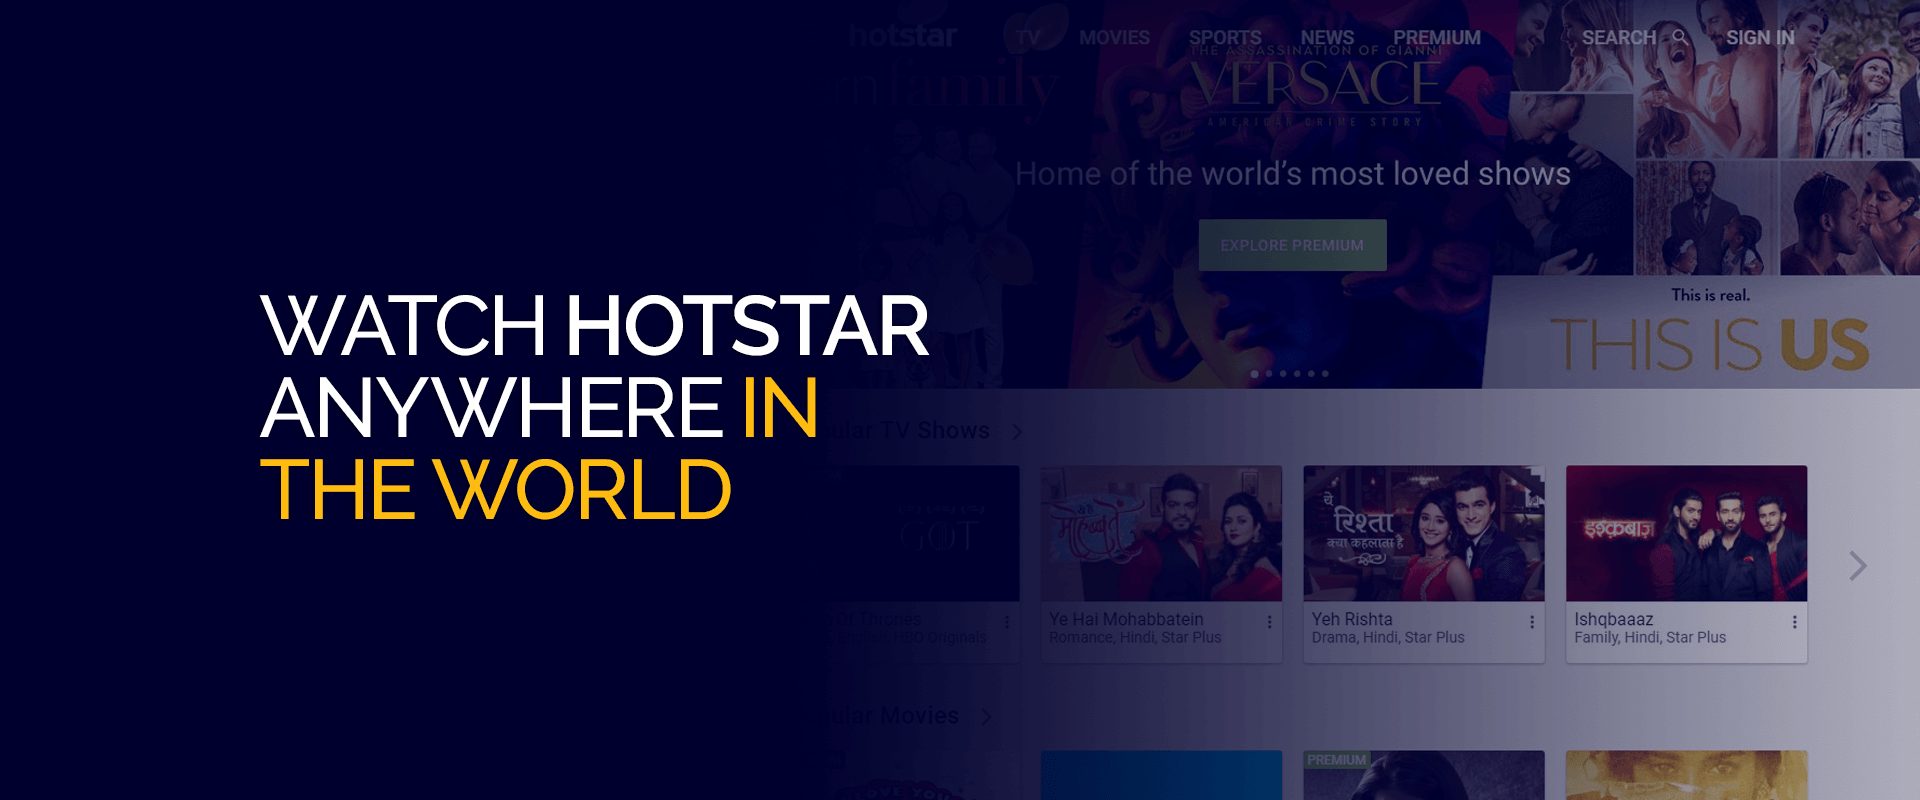 5 best shows and movies on Disney+ Hotstar & more to watch today